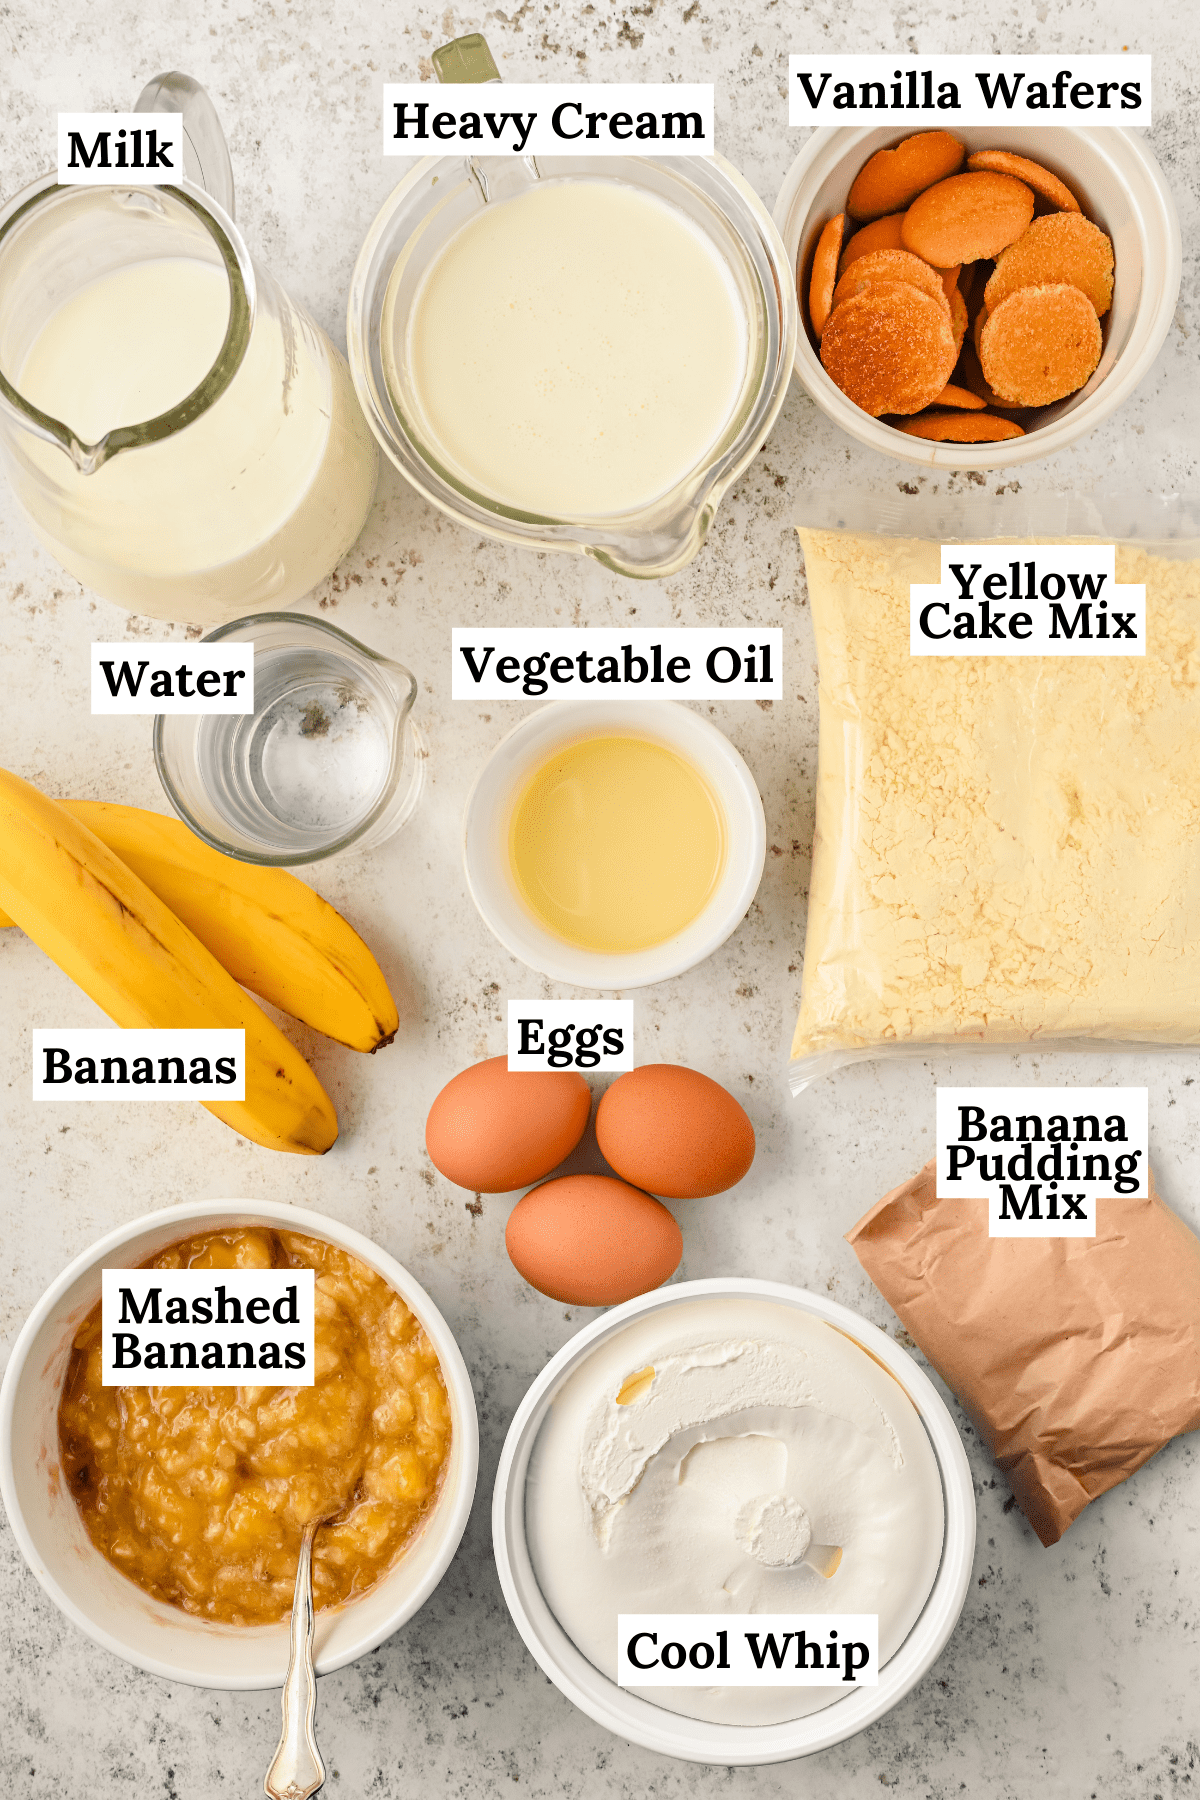 ingredients for banana pudding poke cake arranged on a counter including bananas, 3 eggs, vegetable oil, mashed bananas, cool whip, banana pudding mix and yellow cake mix